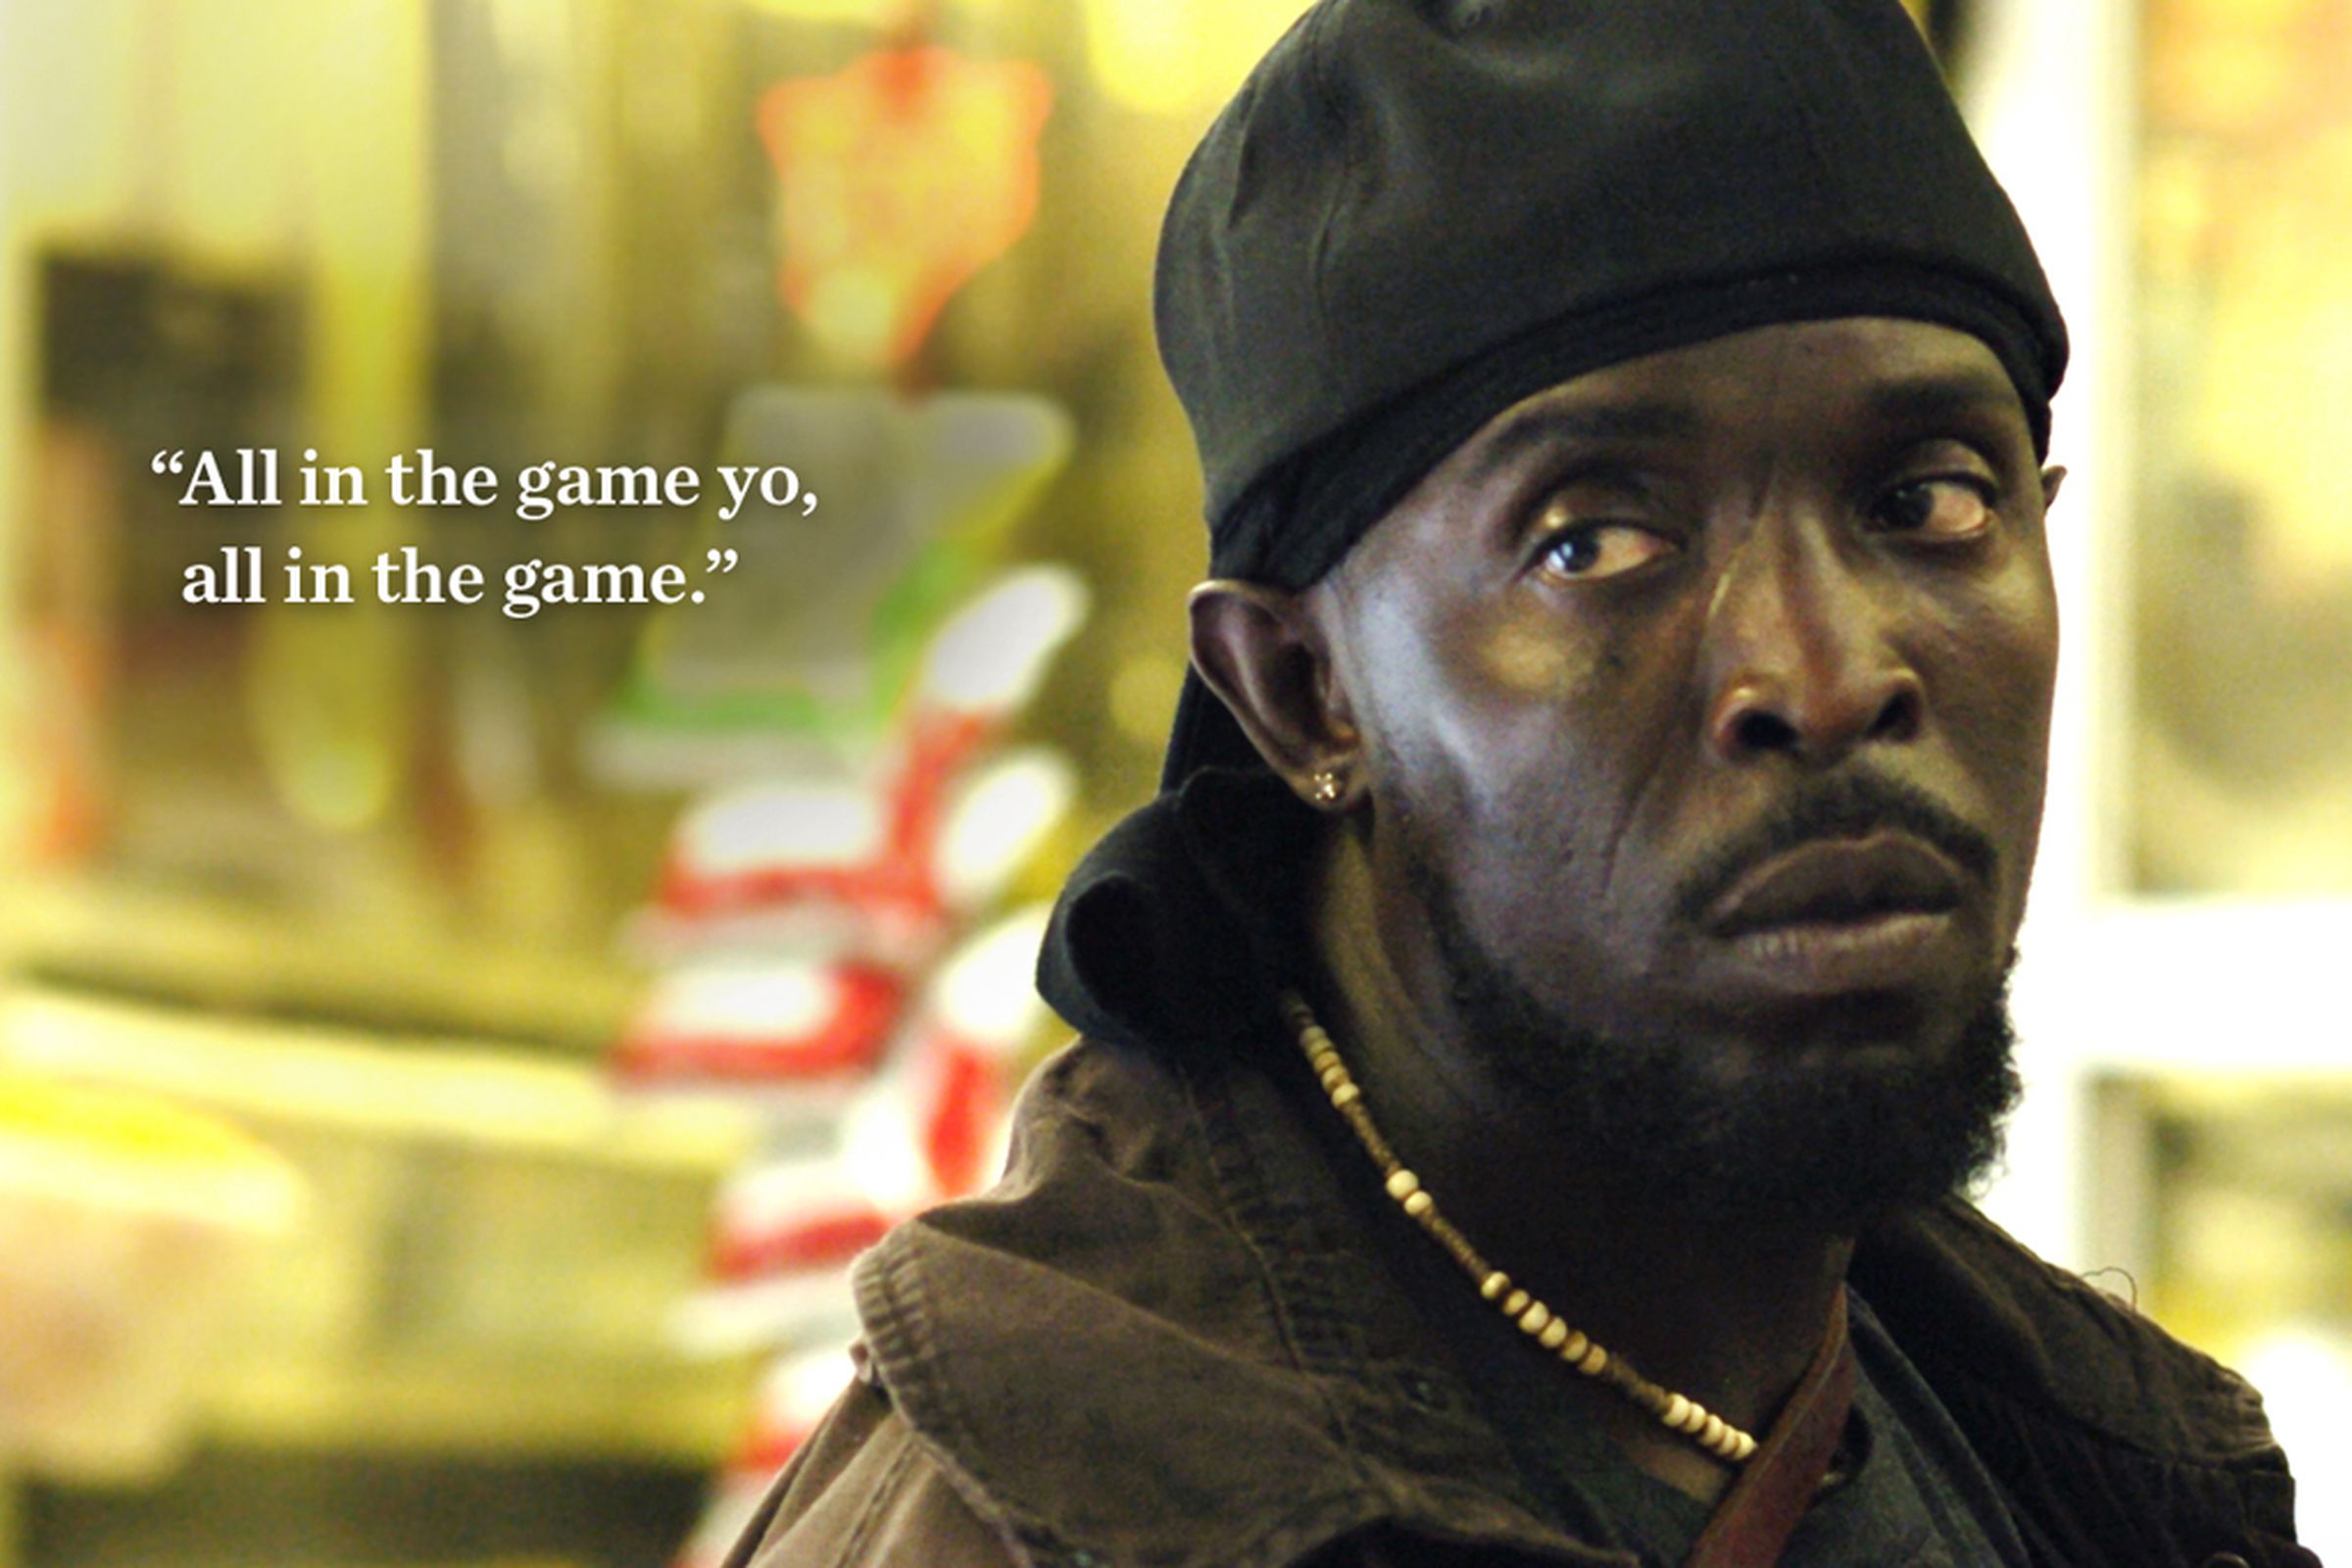 The Wire Omar "All in the game, yo"